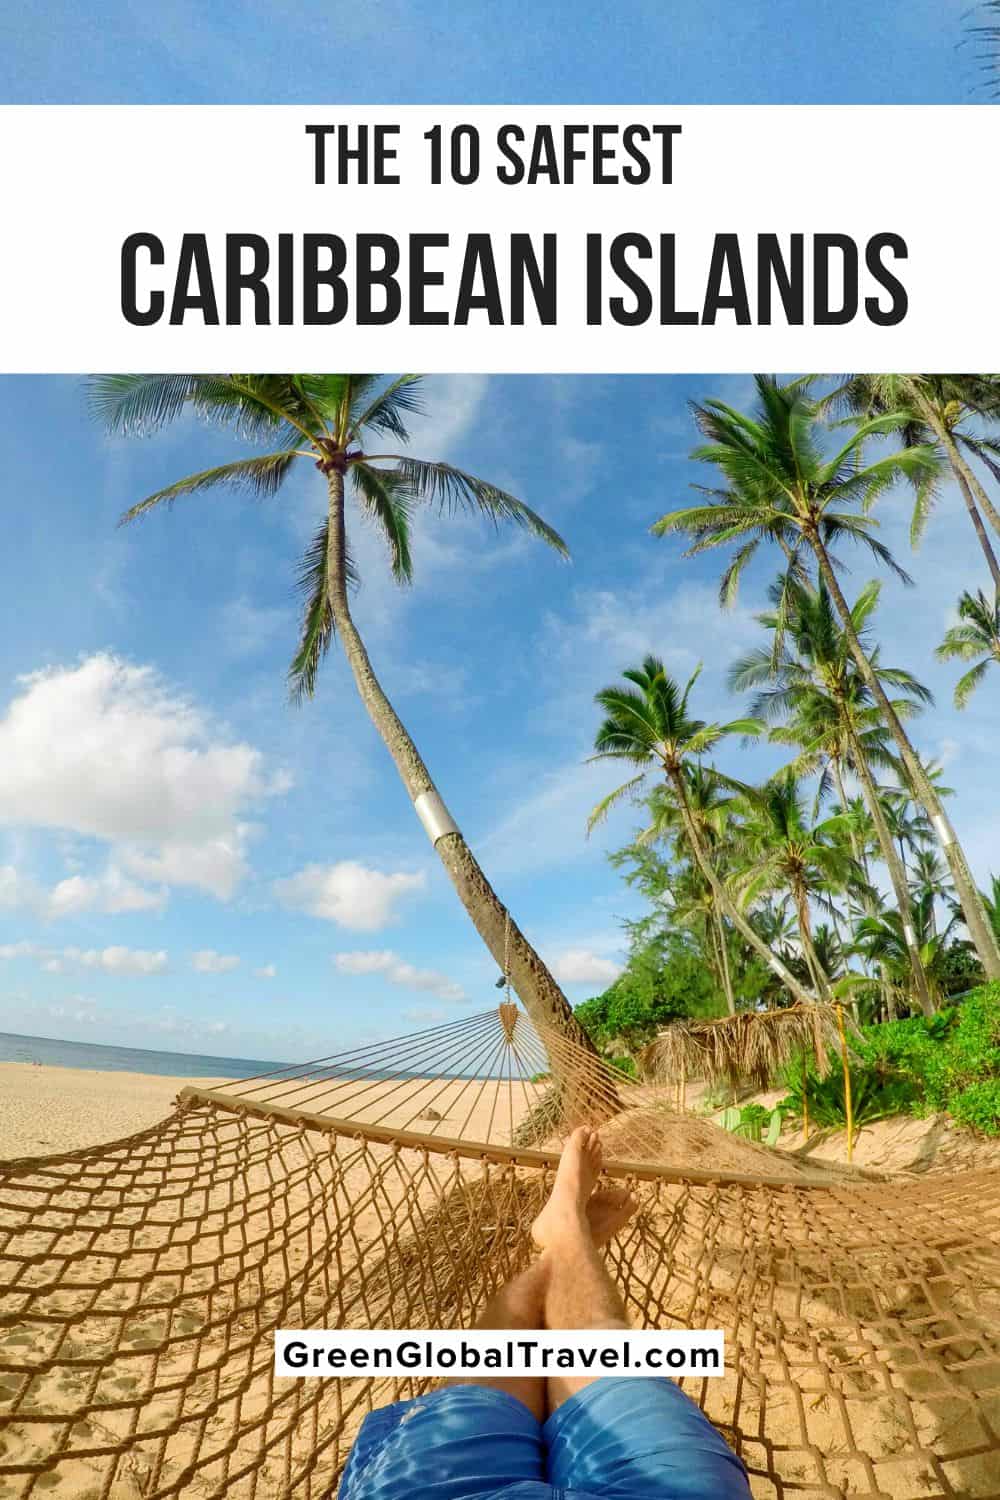 An in-depth guide to the 10 Safest Caribbean Islands, including an overview of the safety concerns & an overview of fun things to do there. | caribbean safest islands | caribbean islands safest | safest islands caribbean | safest islands to visit |safest caribbean countries | safest tropical place to travel | safest countries in the caribbean | safest caribbean country | safest island in the caribbean | safe caribbean islands to visit | safest islands in the caribbean to visit |